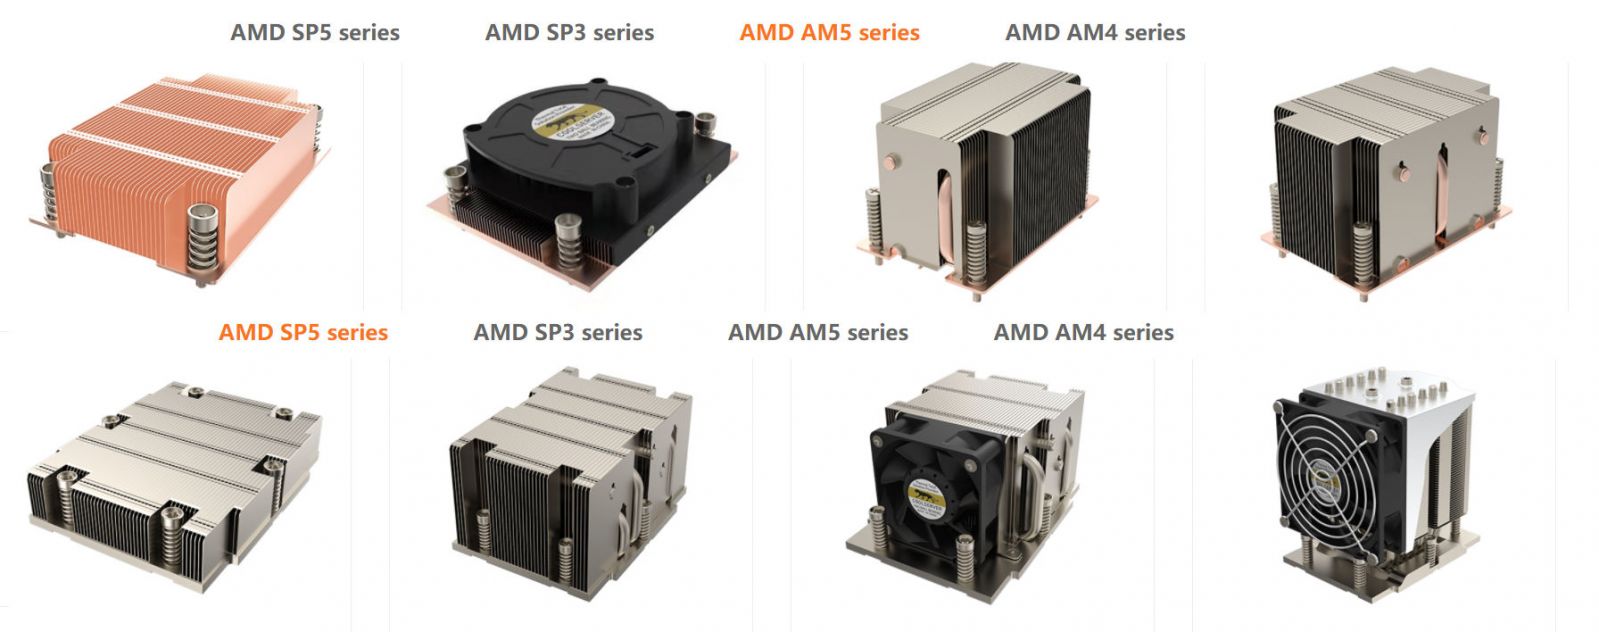 AMD-SP5-and-AM5-coolers.jpg